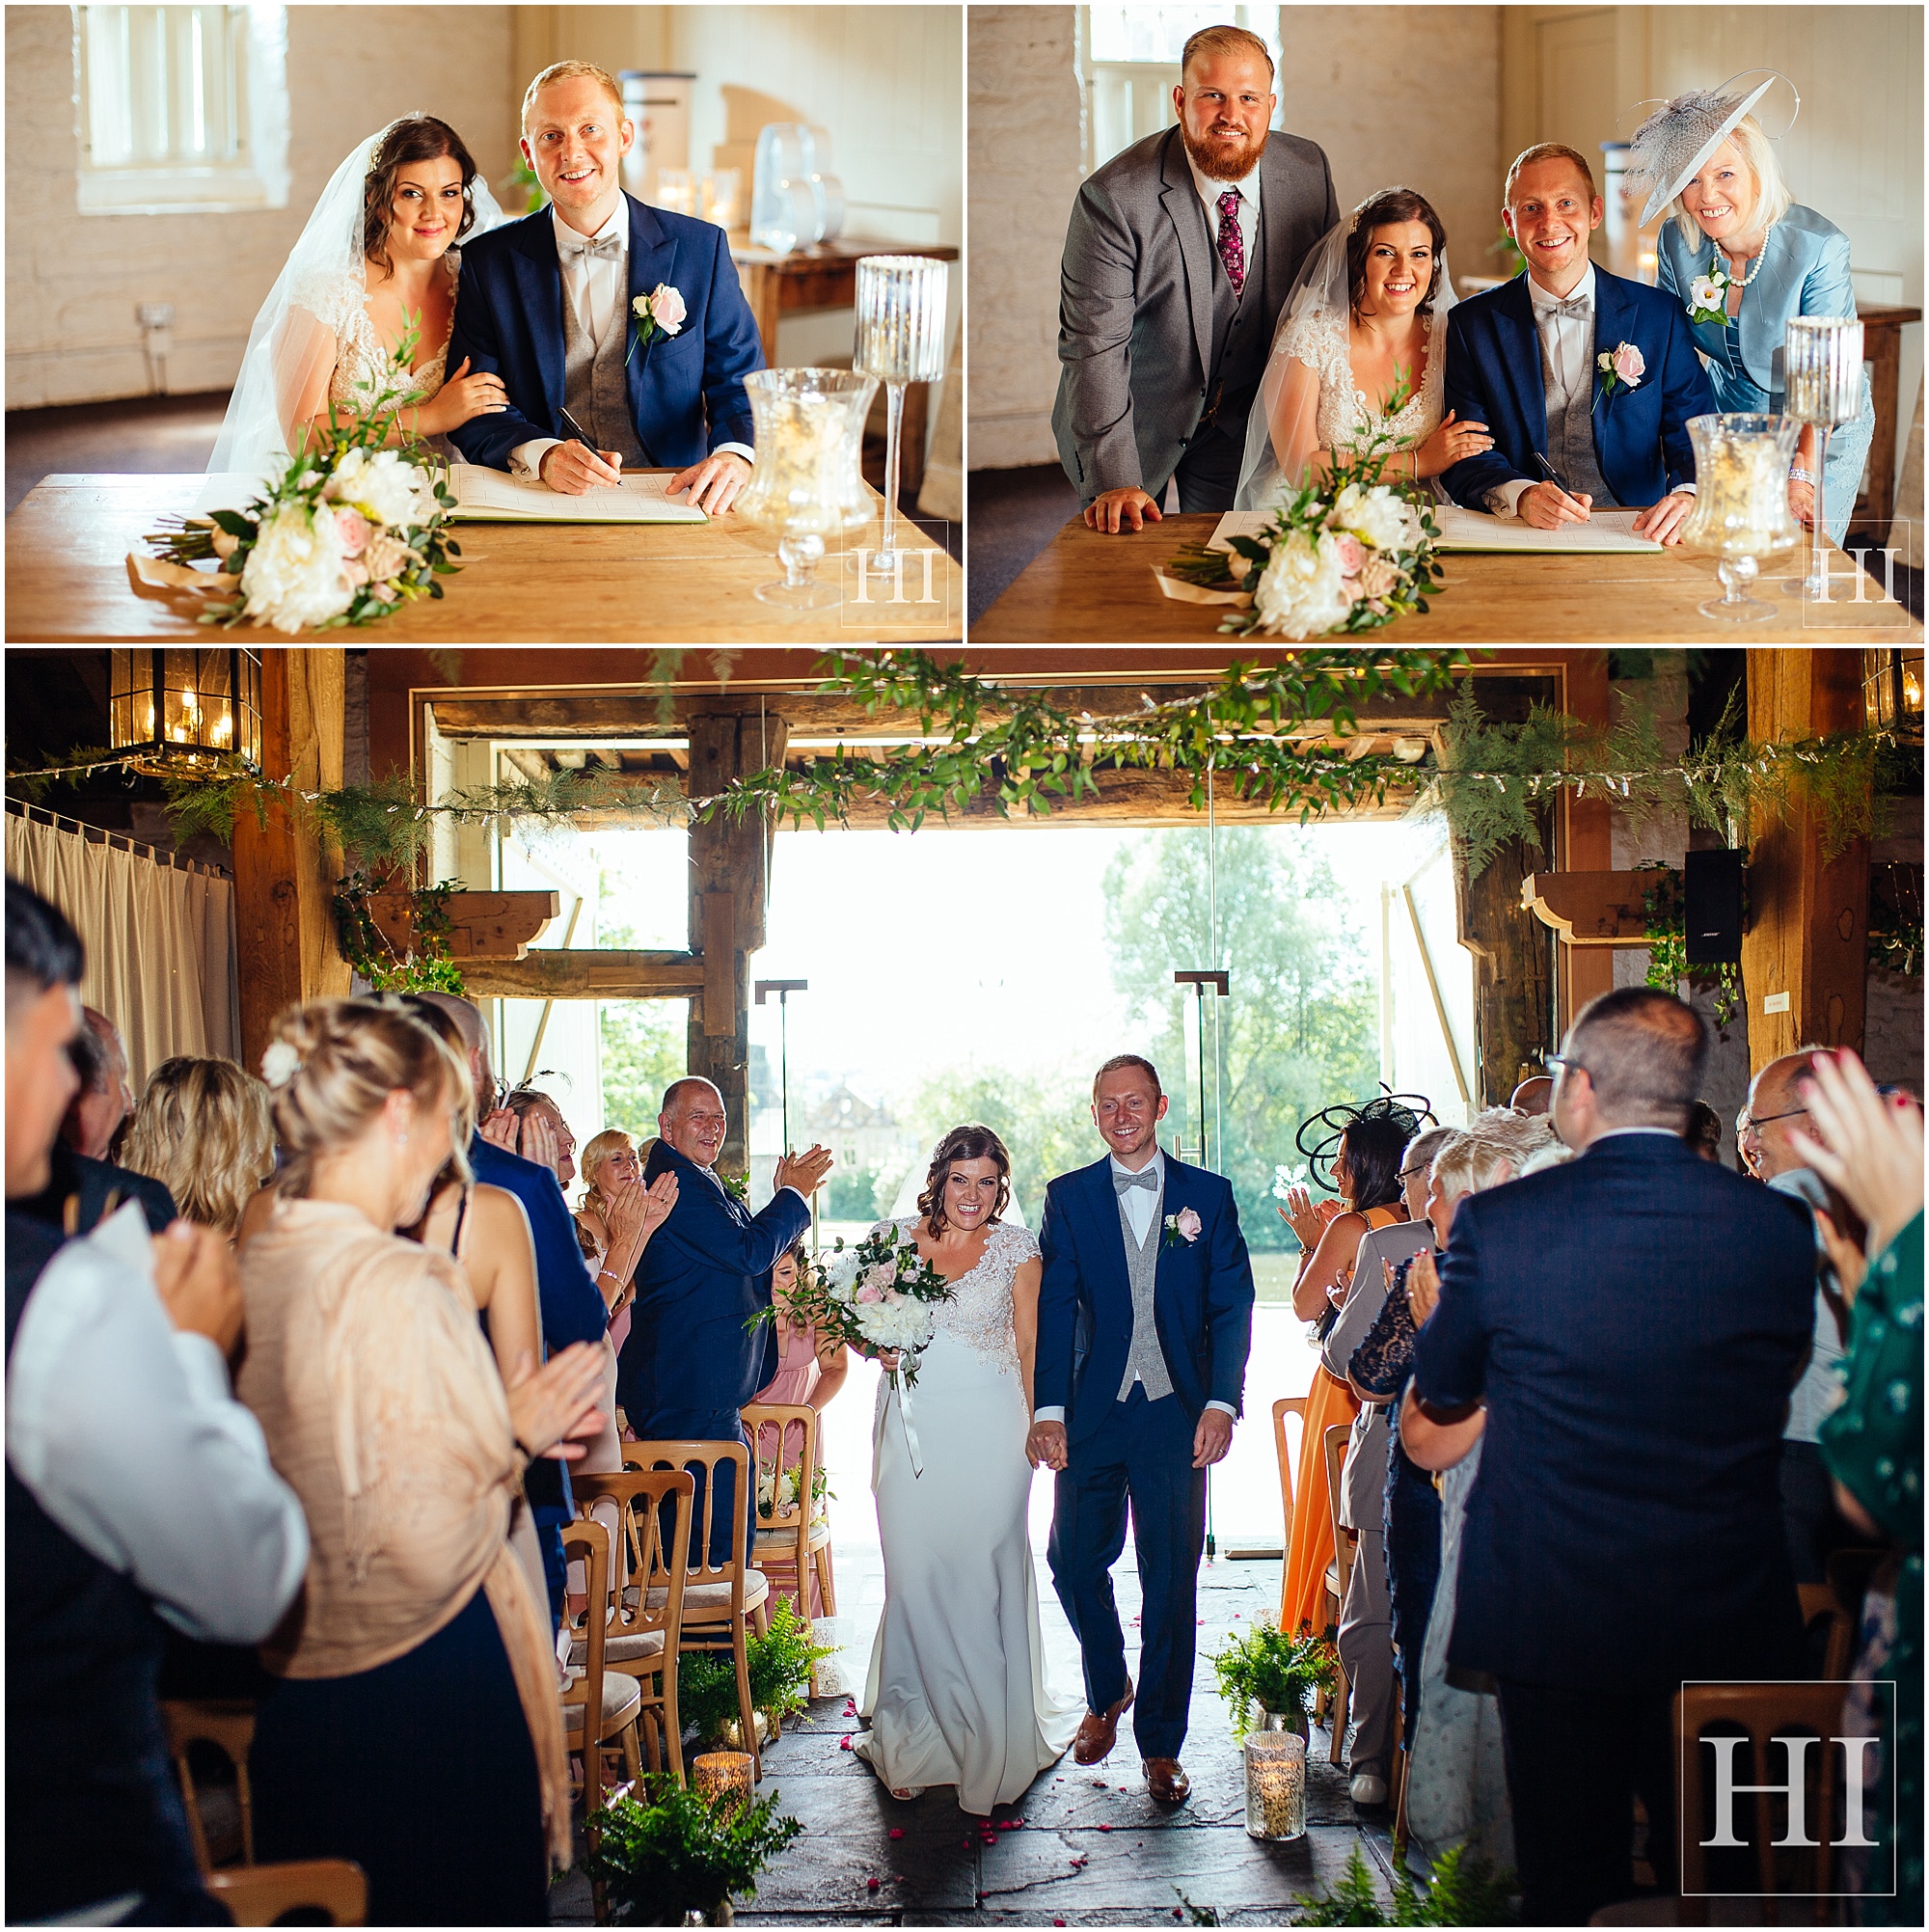 Hamish Irvine East Riddlesden Hall Wedding Photographer Jenn and Adam Leeds Hog and Apple Typical Type Barn West Yorkshire Hollins Hall Vintage Keighley Barn wedding documentary photography london country creative reportage marriage 